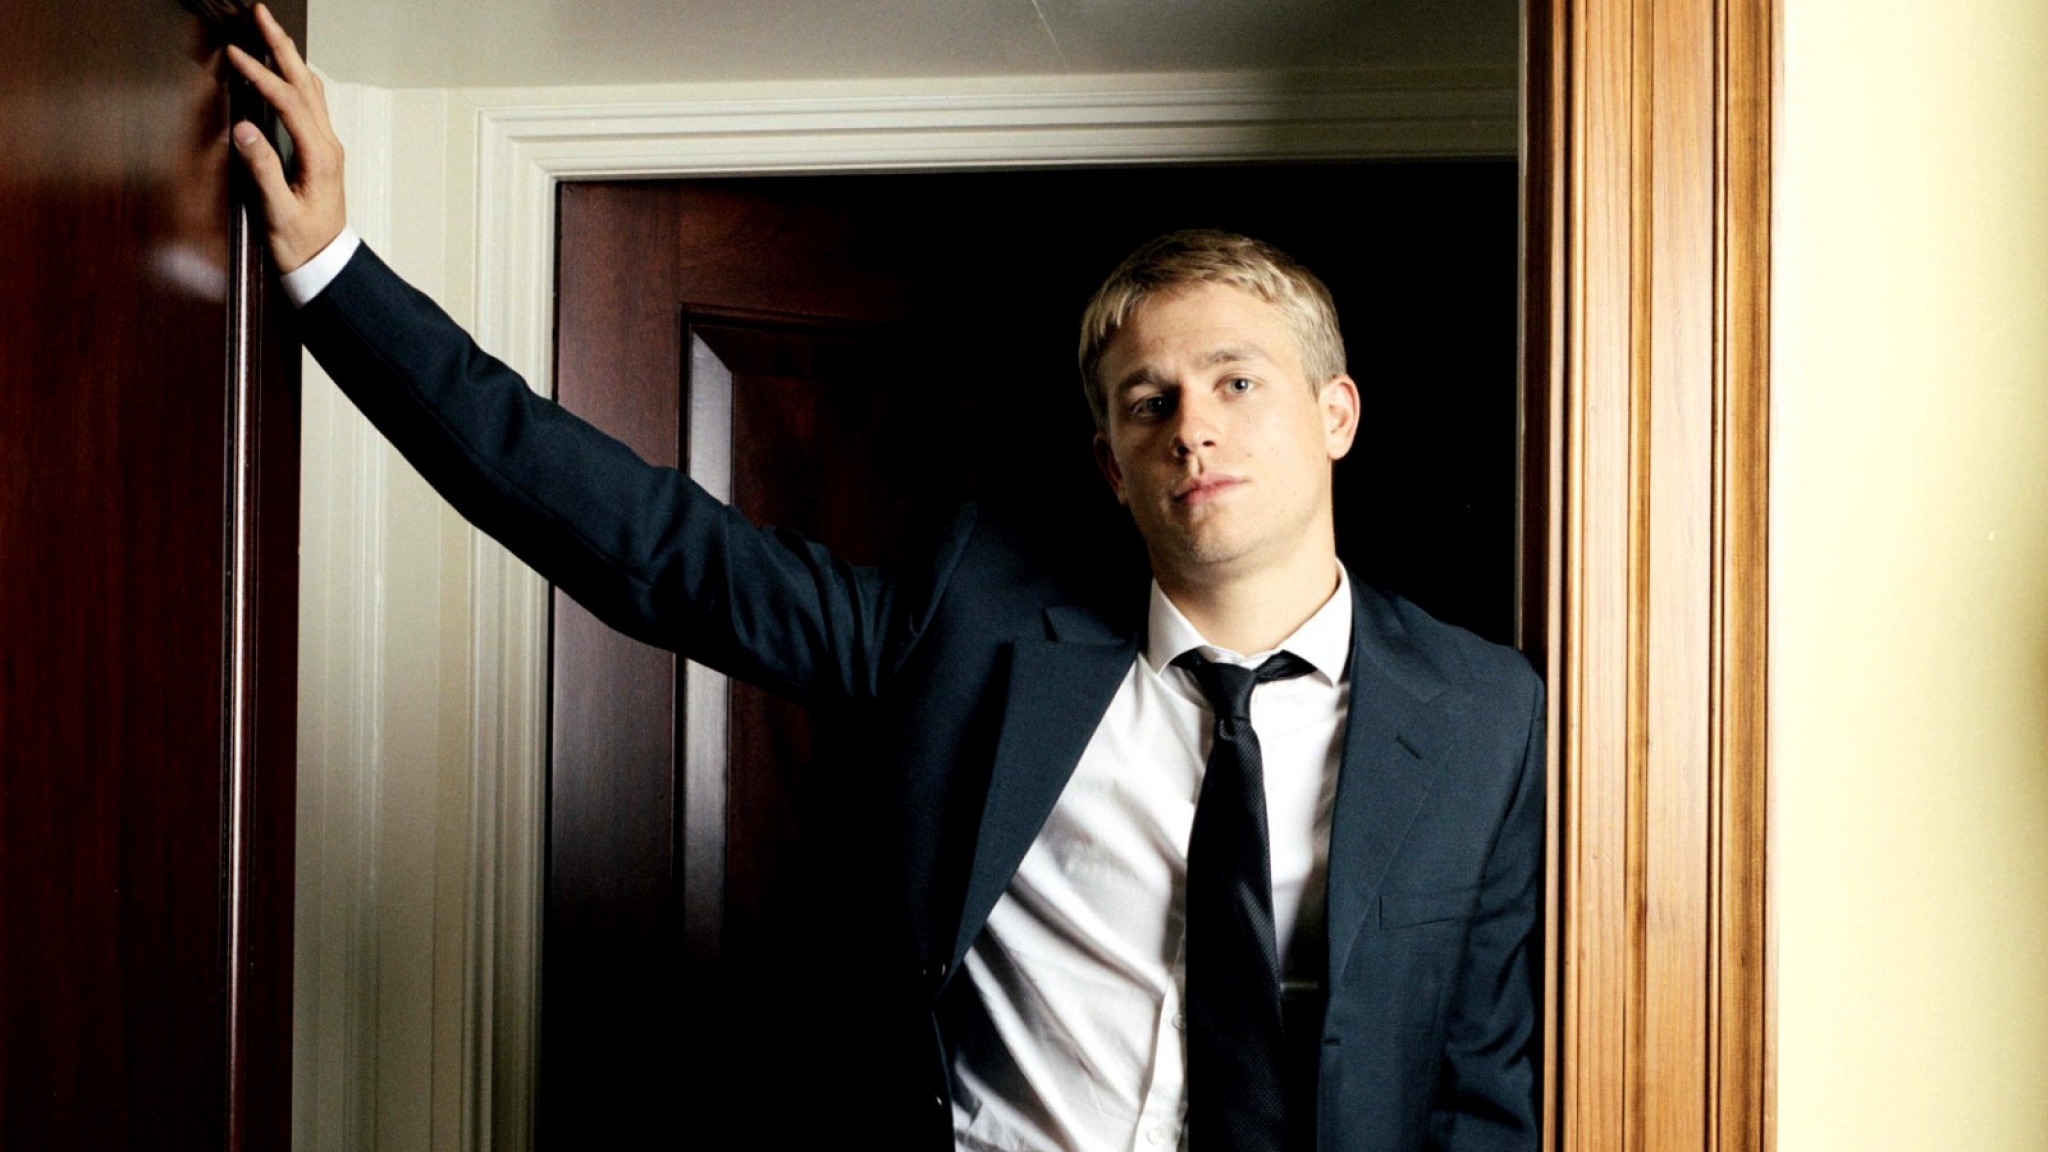 charlie hunnam wallpaper,suit,formal wear,tie,white collar worker,photography